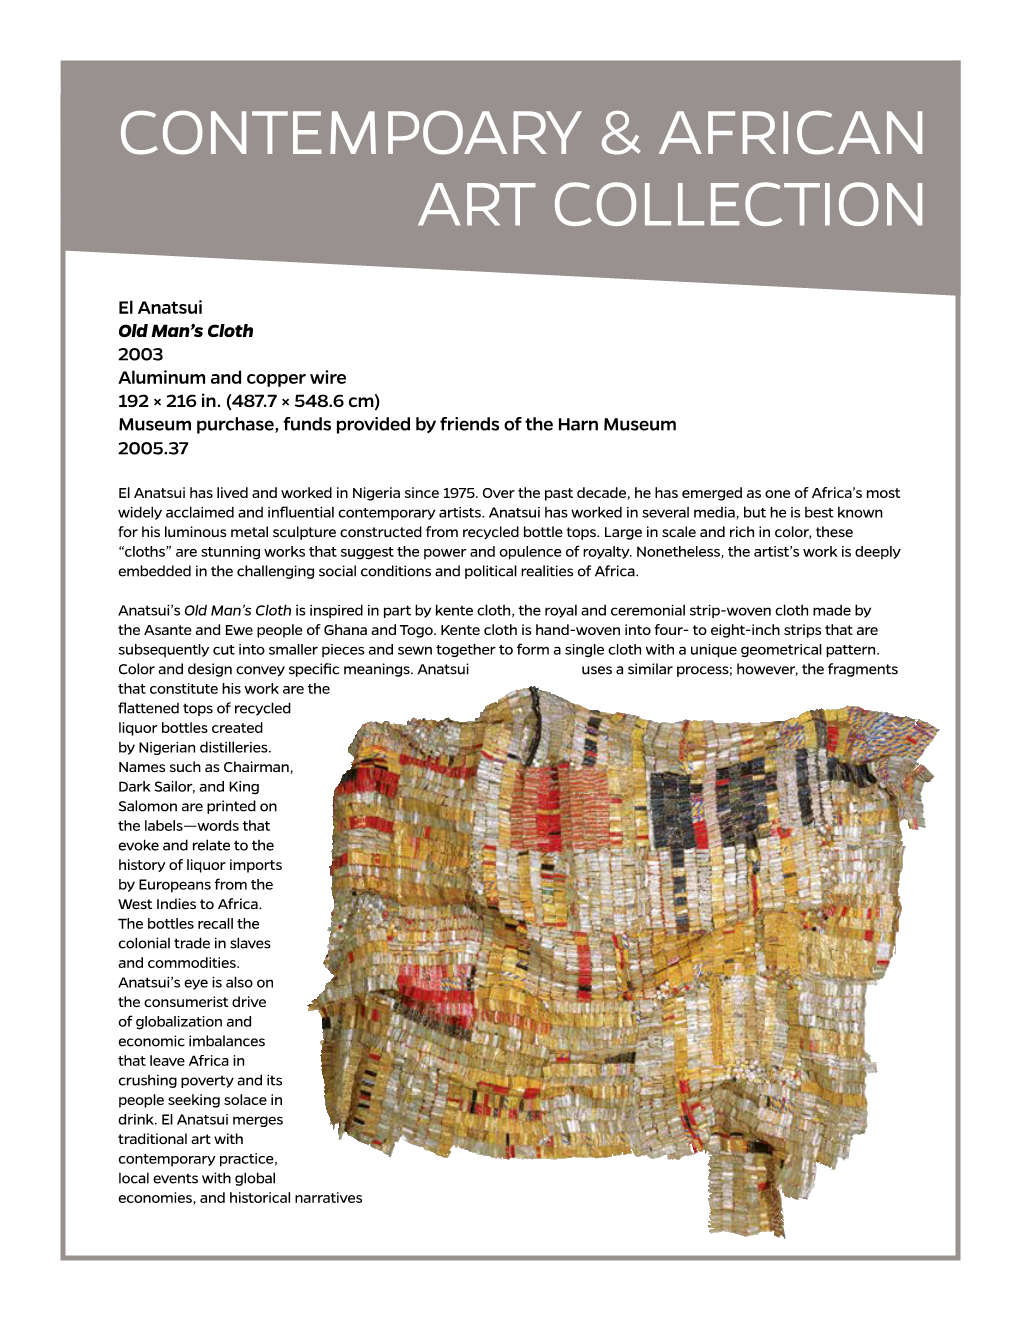 Contempoary & African Art Collection